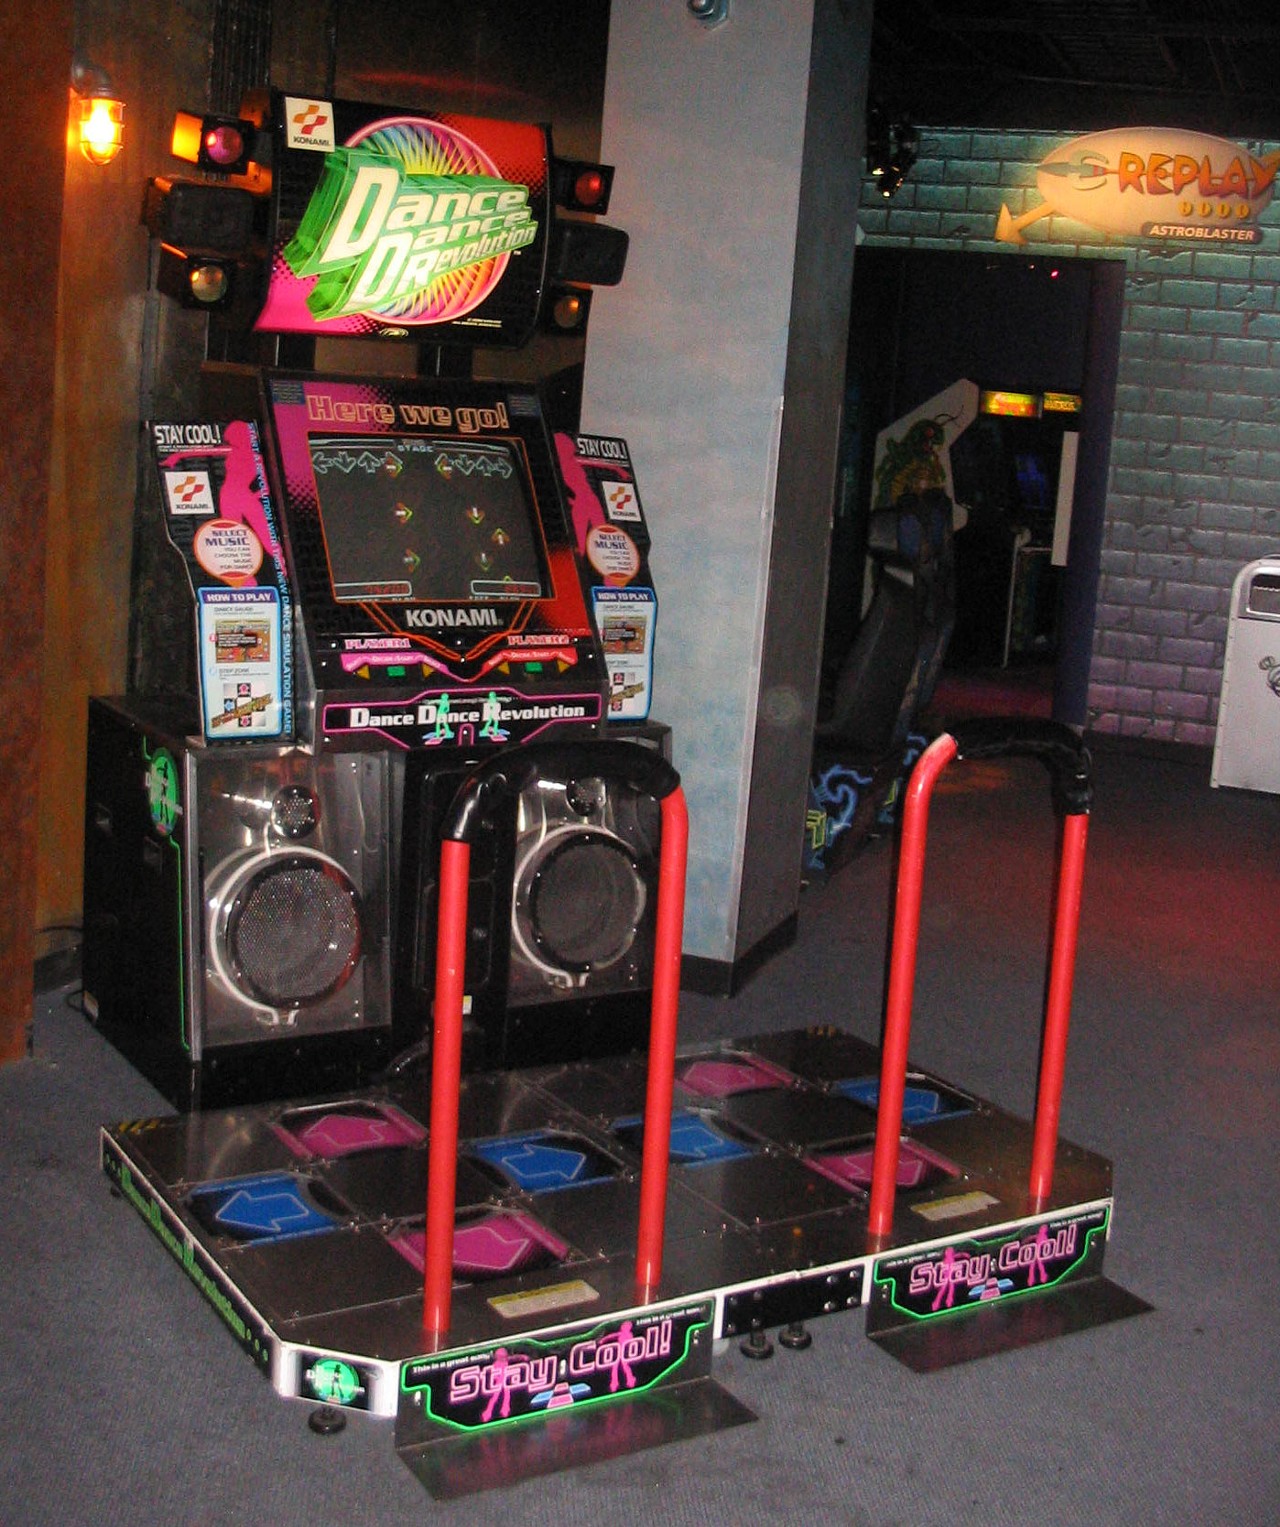 Get drunk and dance at Dave and Busters
They don't say "Everyone's a Winner" here for no reason. (Photo via Wikipedia)